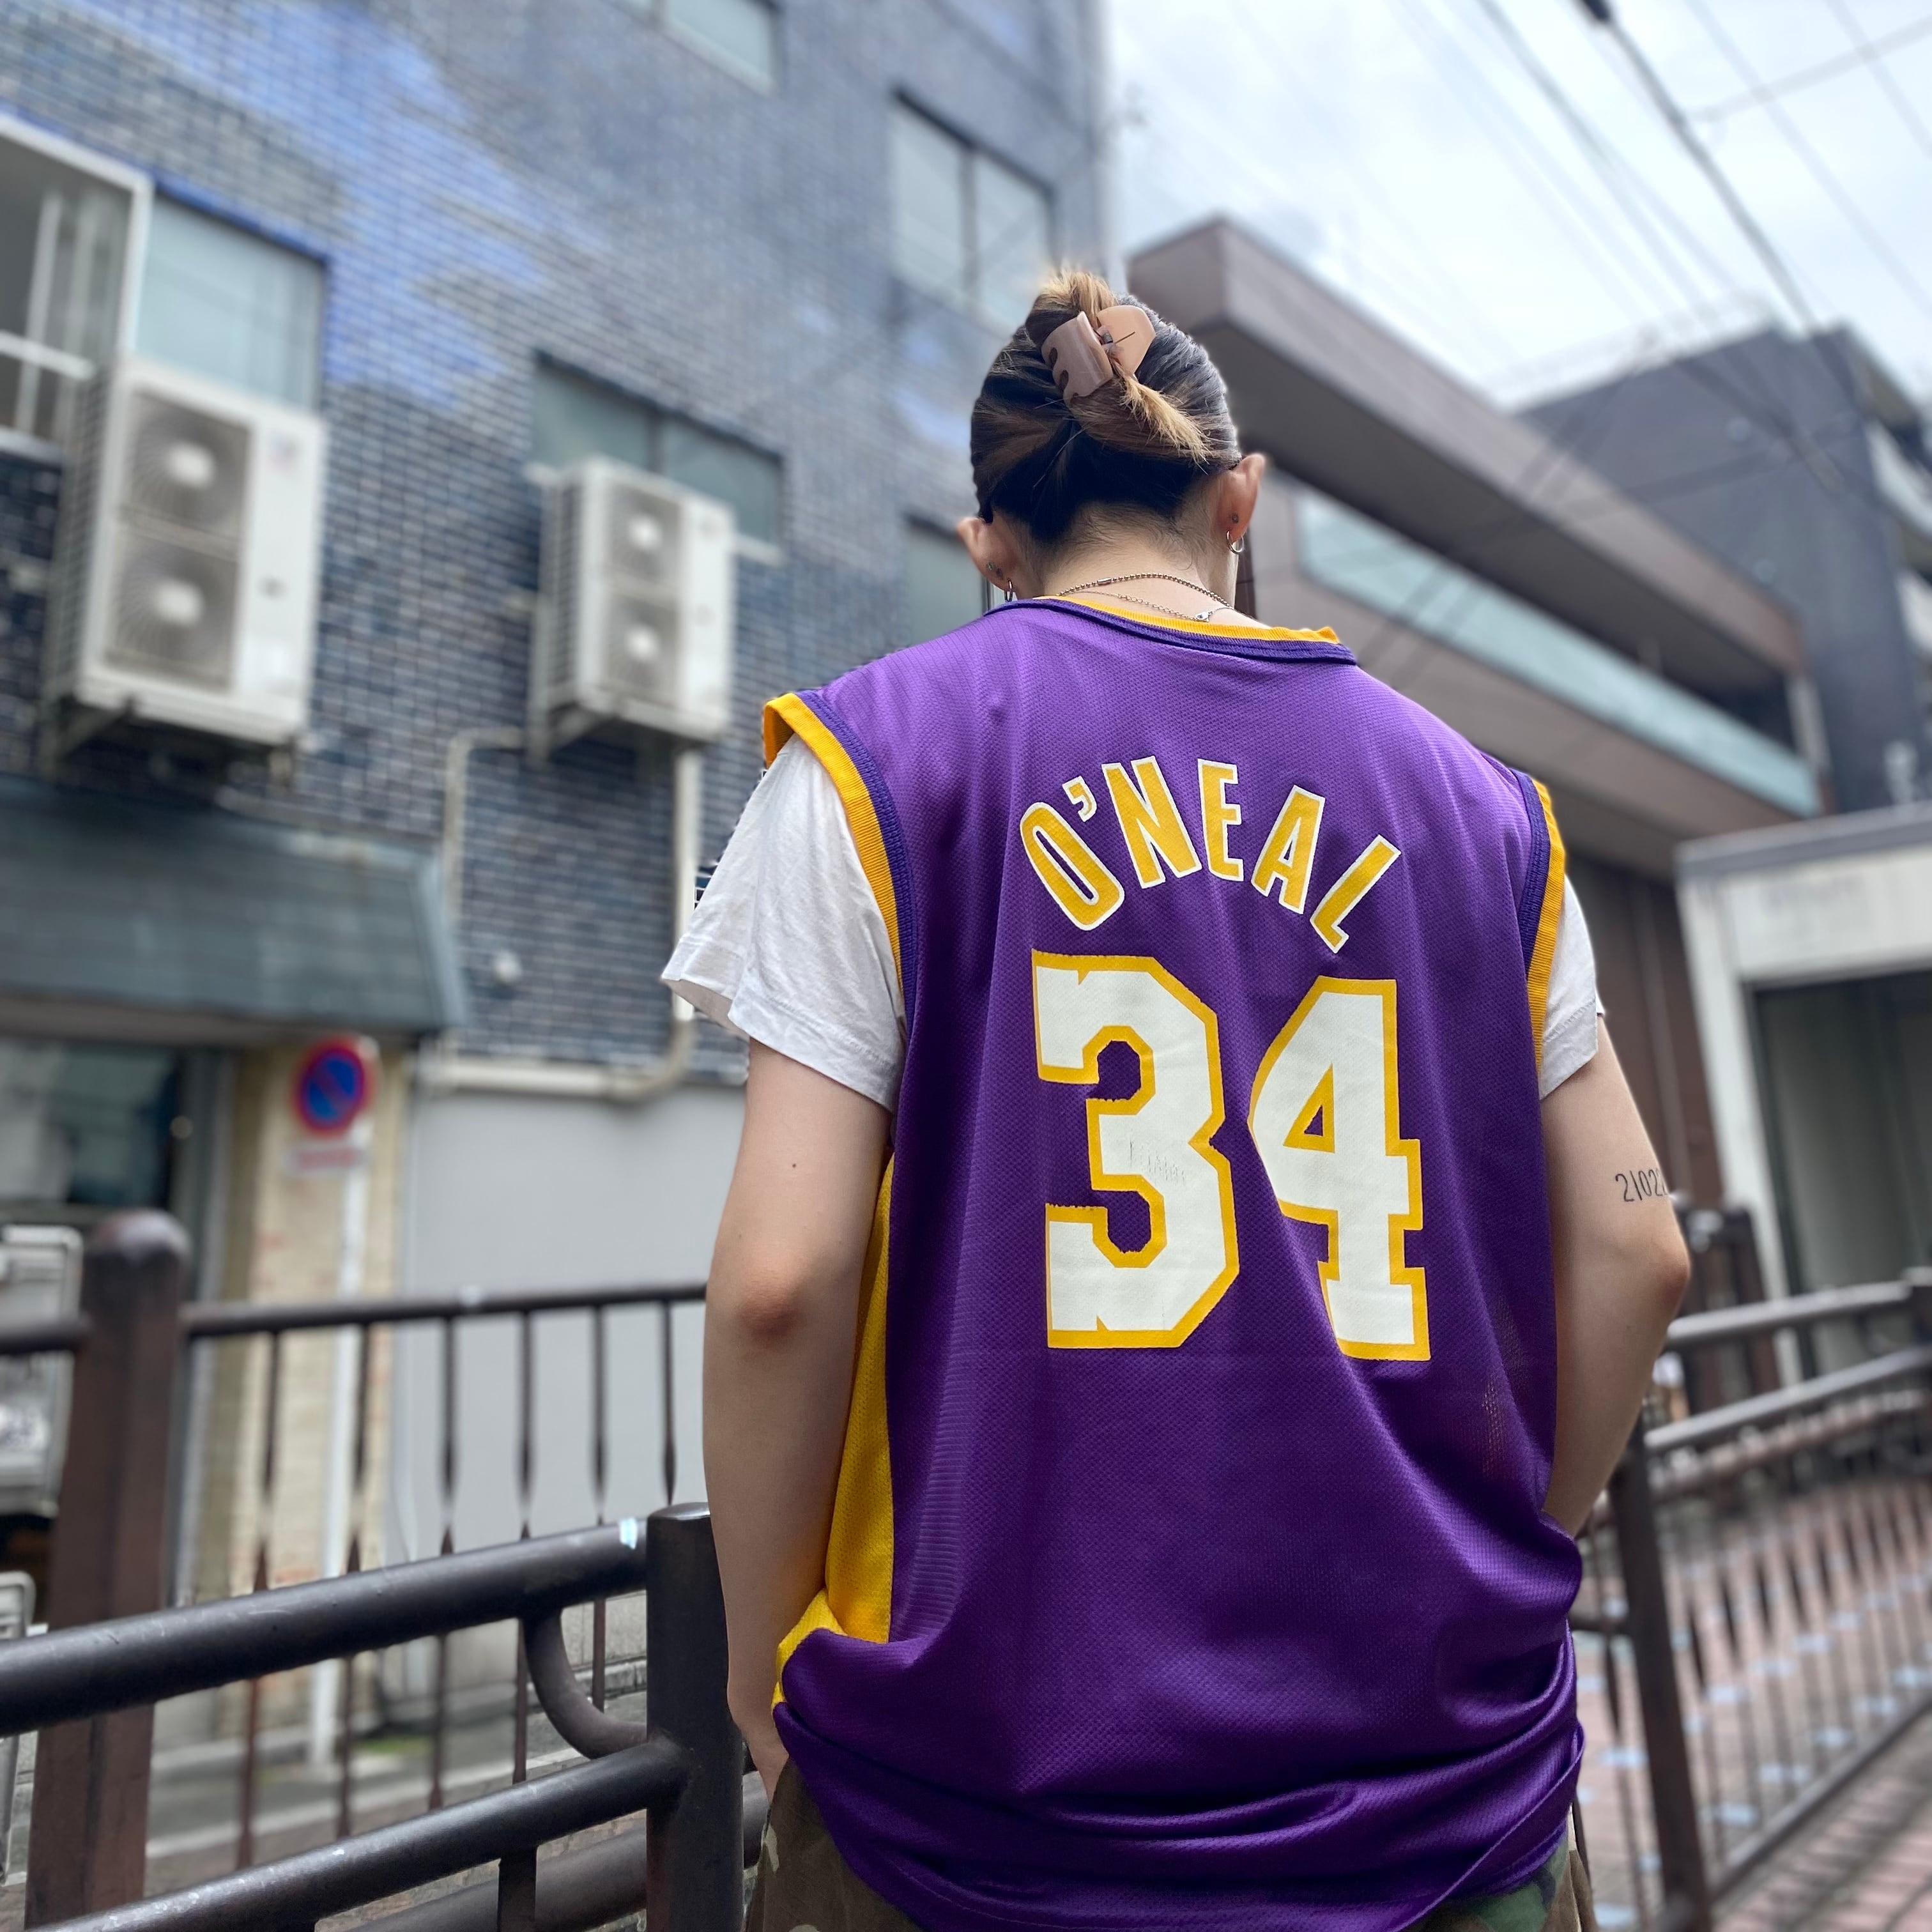 size : M【 LAKERS 】